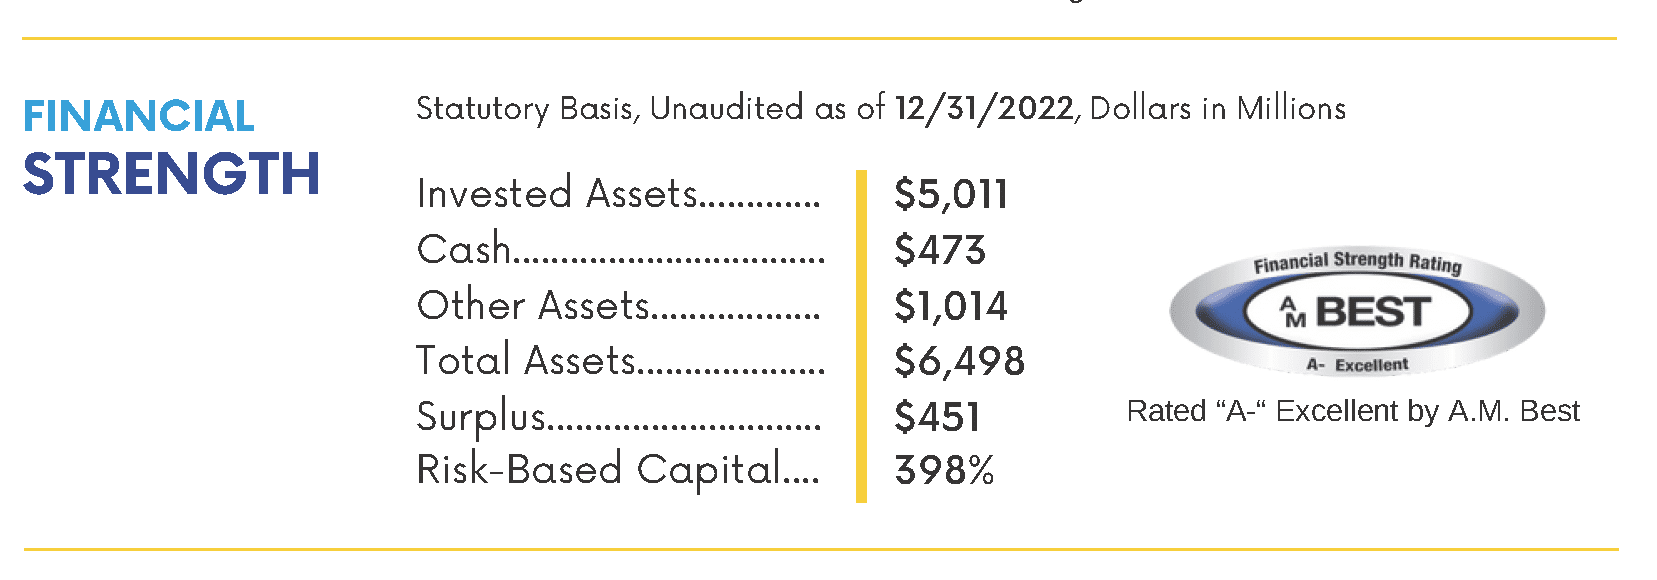 Oceanview assets and liabilities picture that shows assets, liabilities, surplus, risk based capital and am best rating as of 12/31/2022.